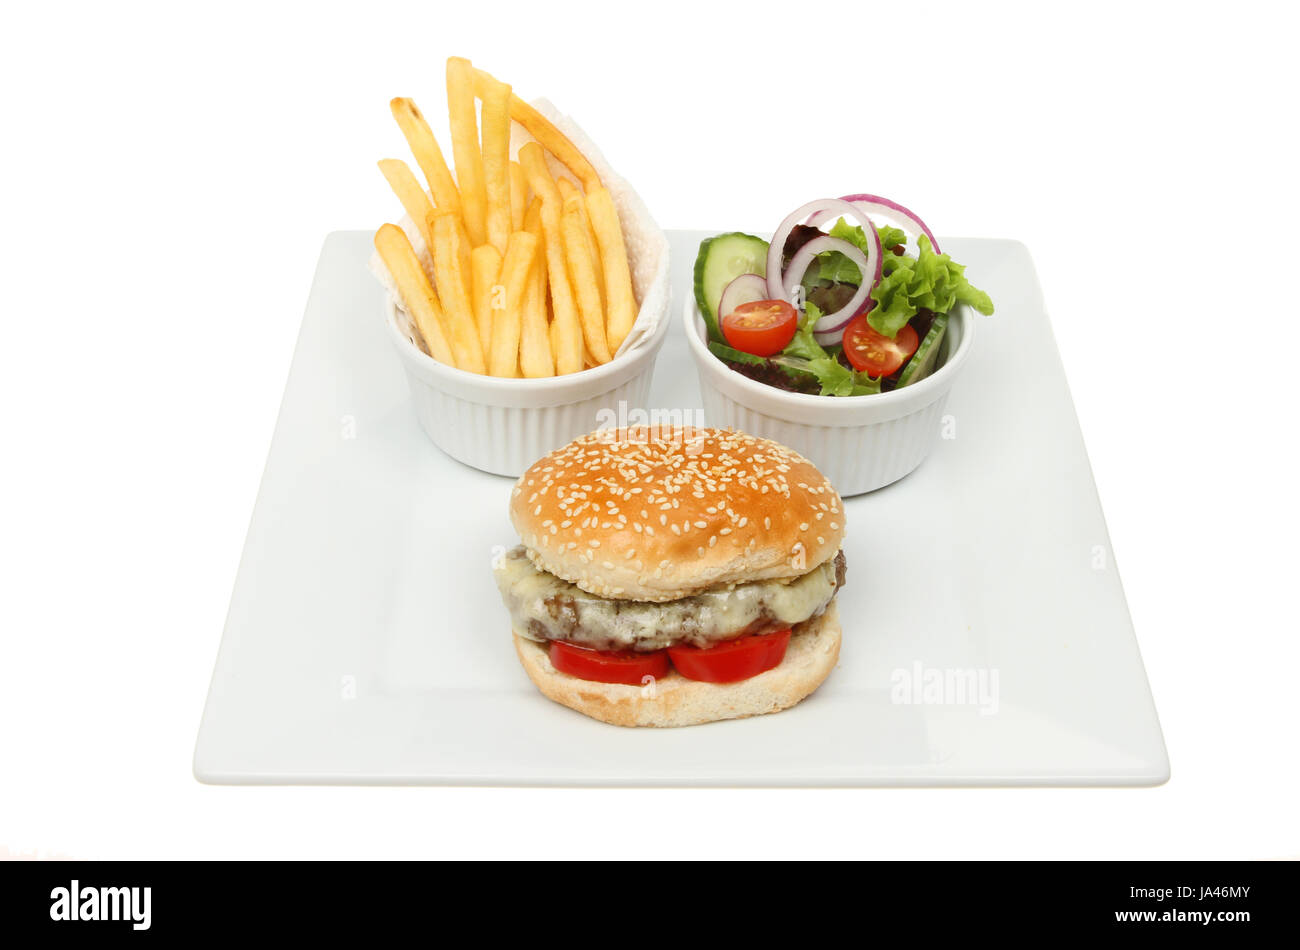 Cheeseburger with salad and fries in ramekins on a square plate isolated against white Stock Photo